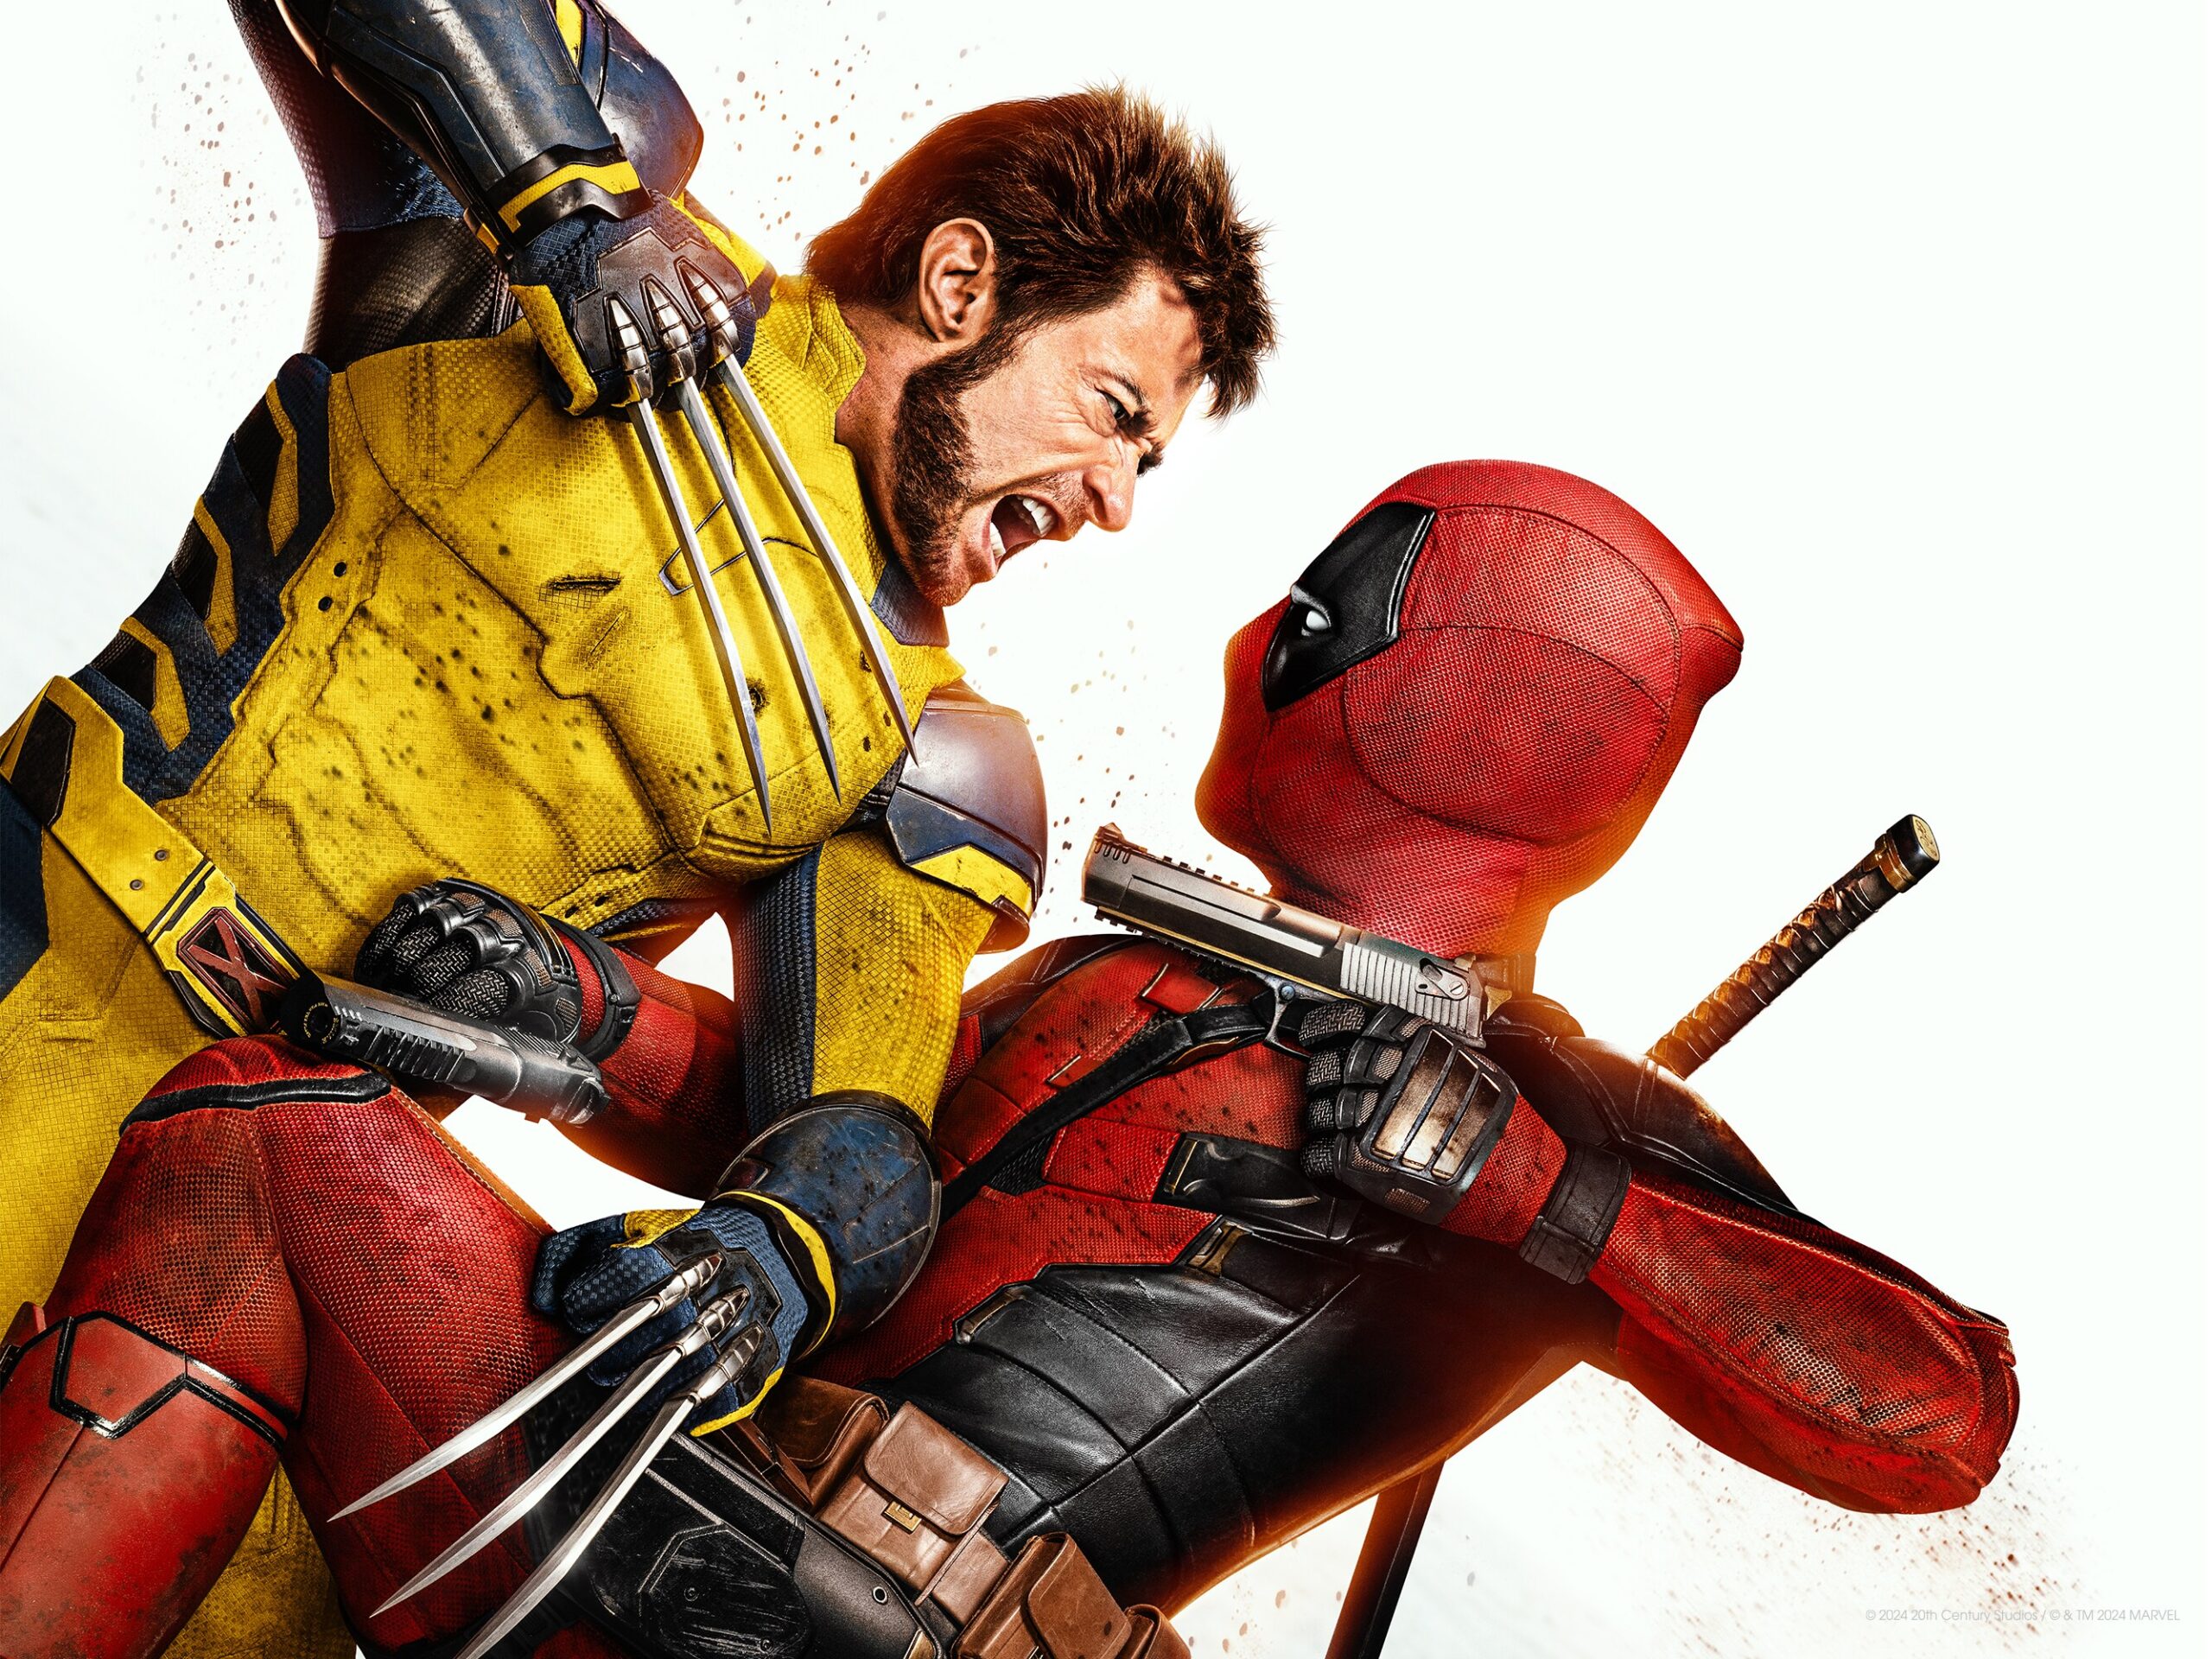 Deadpool and Wolverine: "Everything you'll want in a Marvel movie"